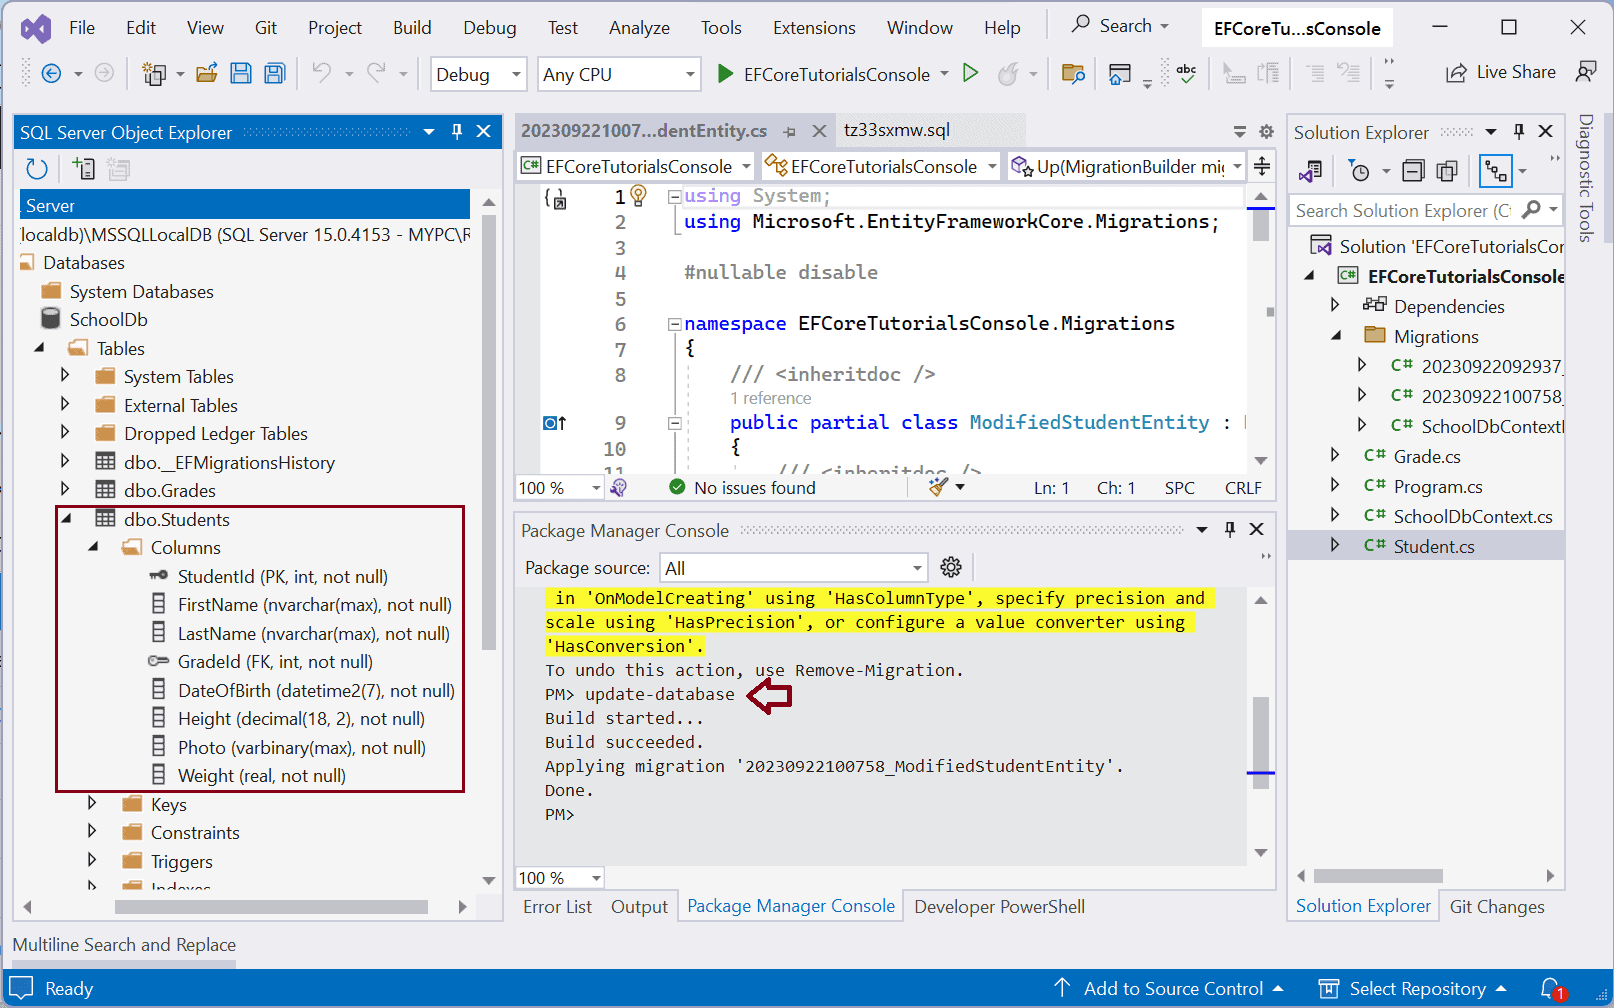 HELP - HOW DO I EXECUTE THIS COMMAND ** Modify Relationship Cheat